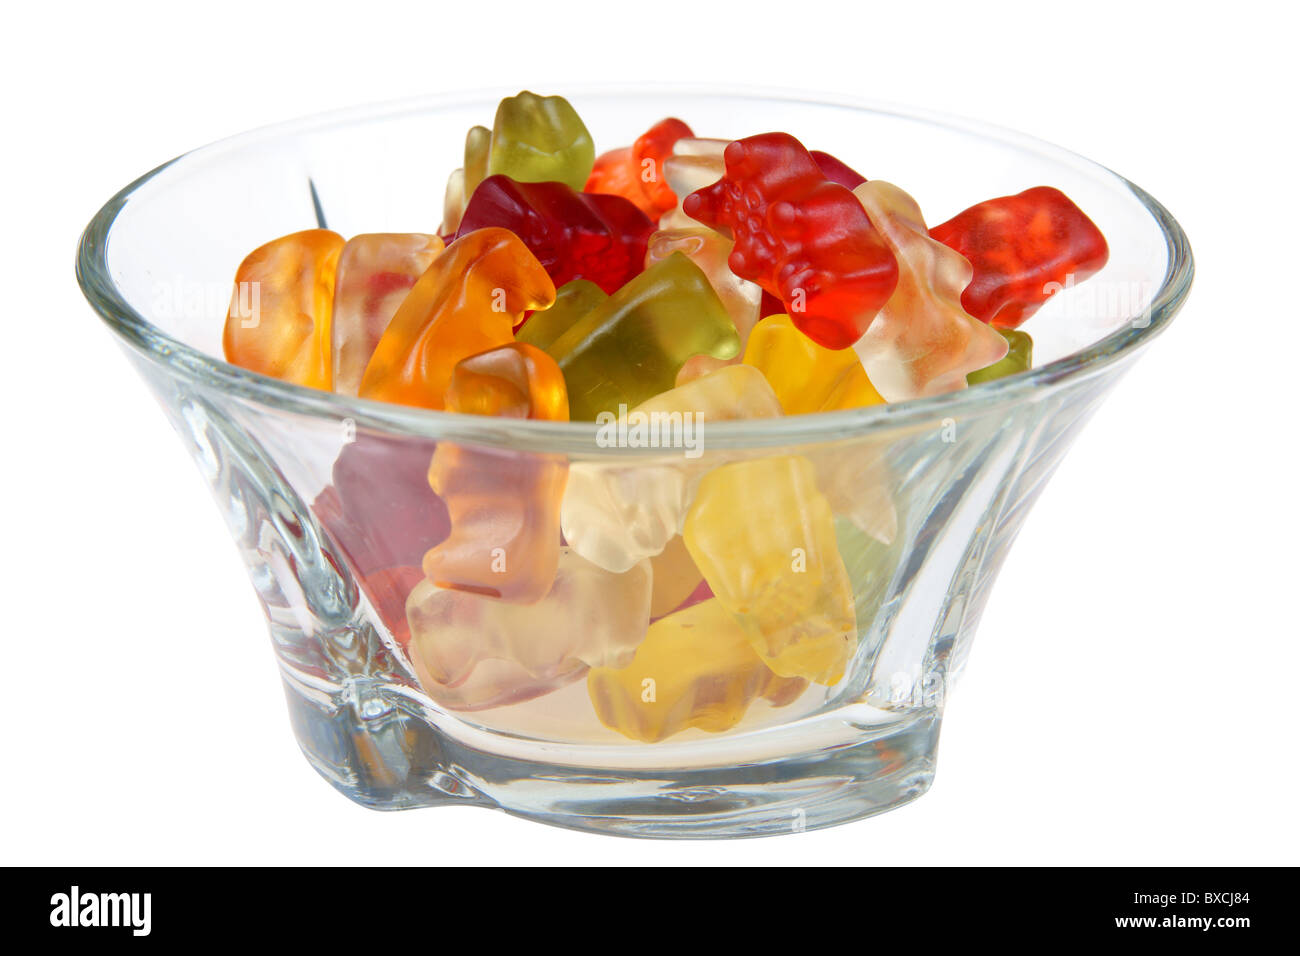 Gummy bears in glass bowl isolated on white background Stock Photo